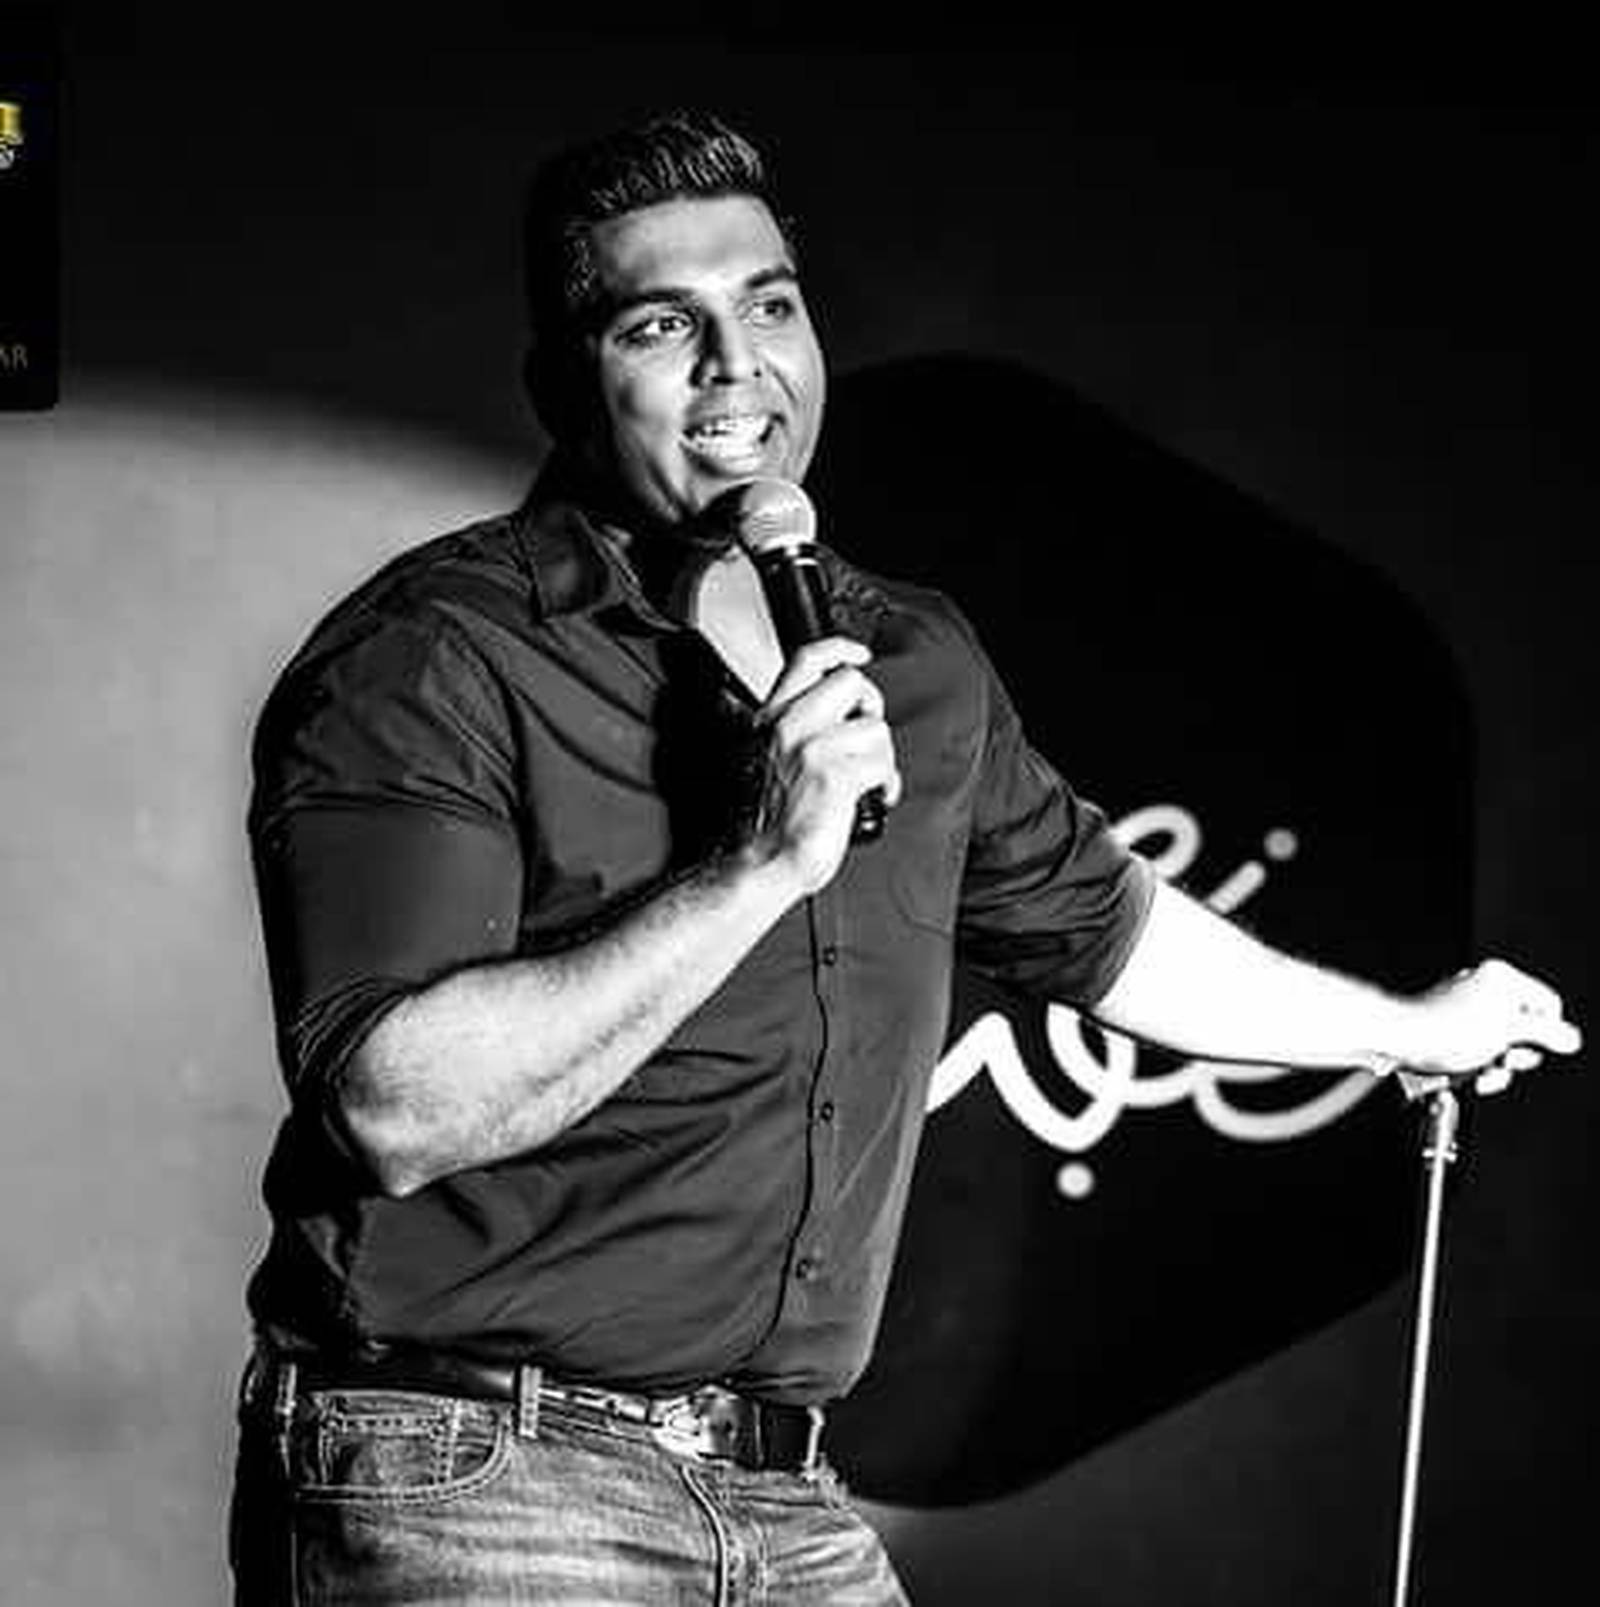 Indian comedian collapses on stage in Dubai and dies